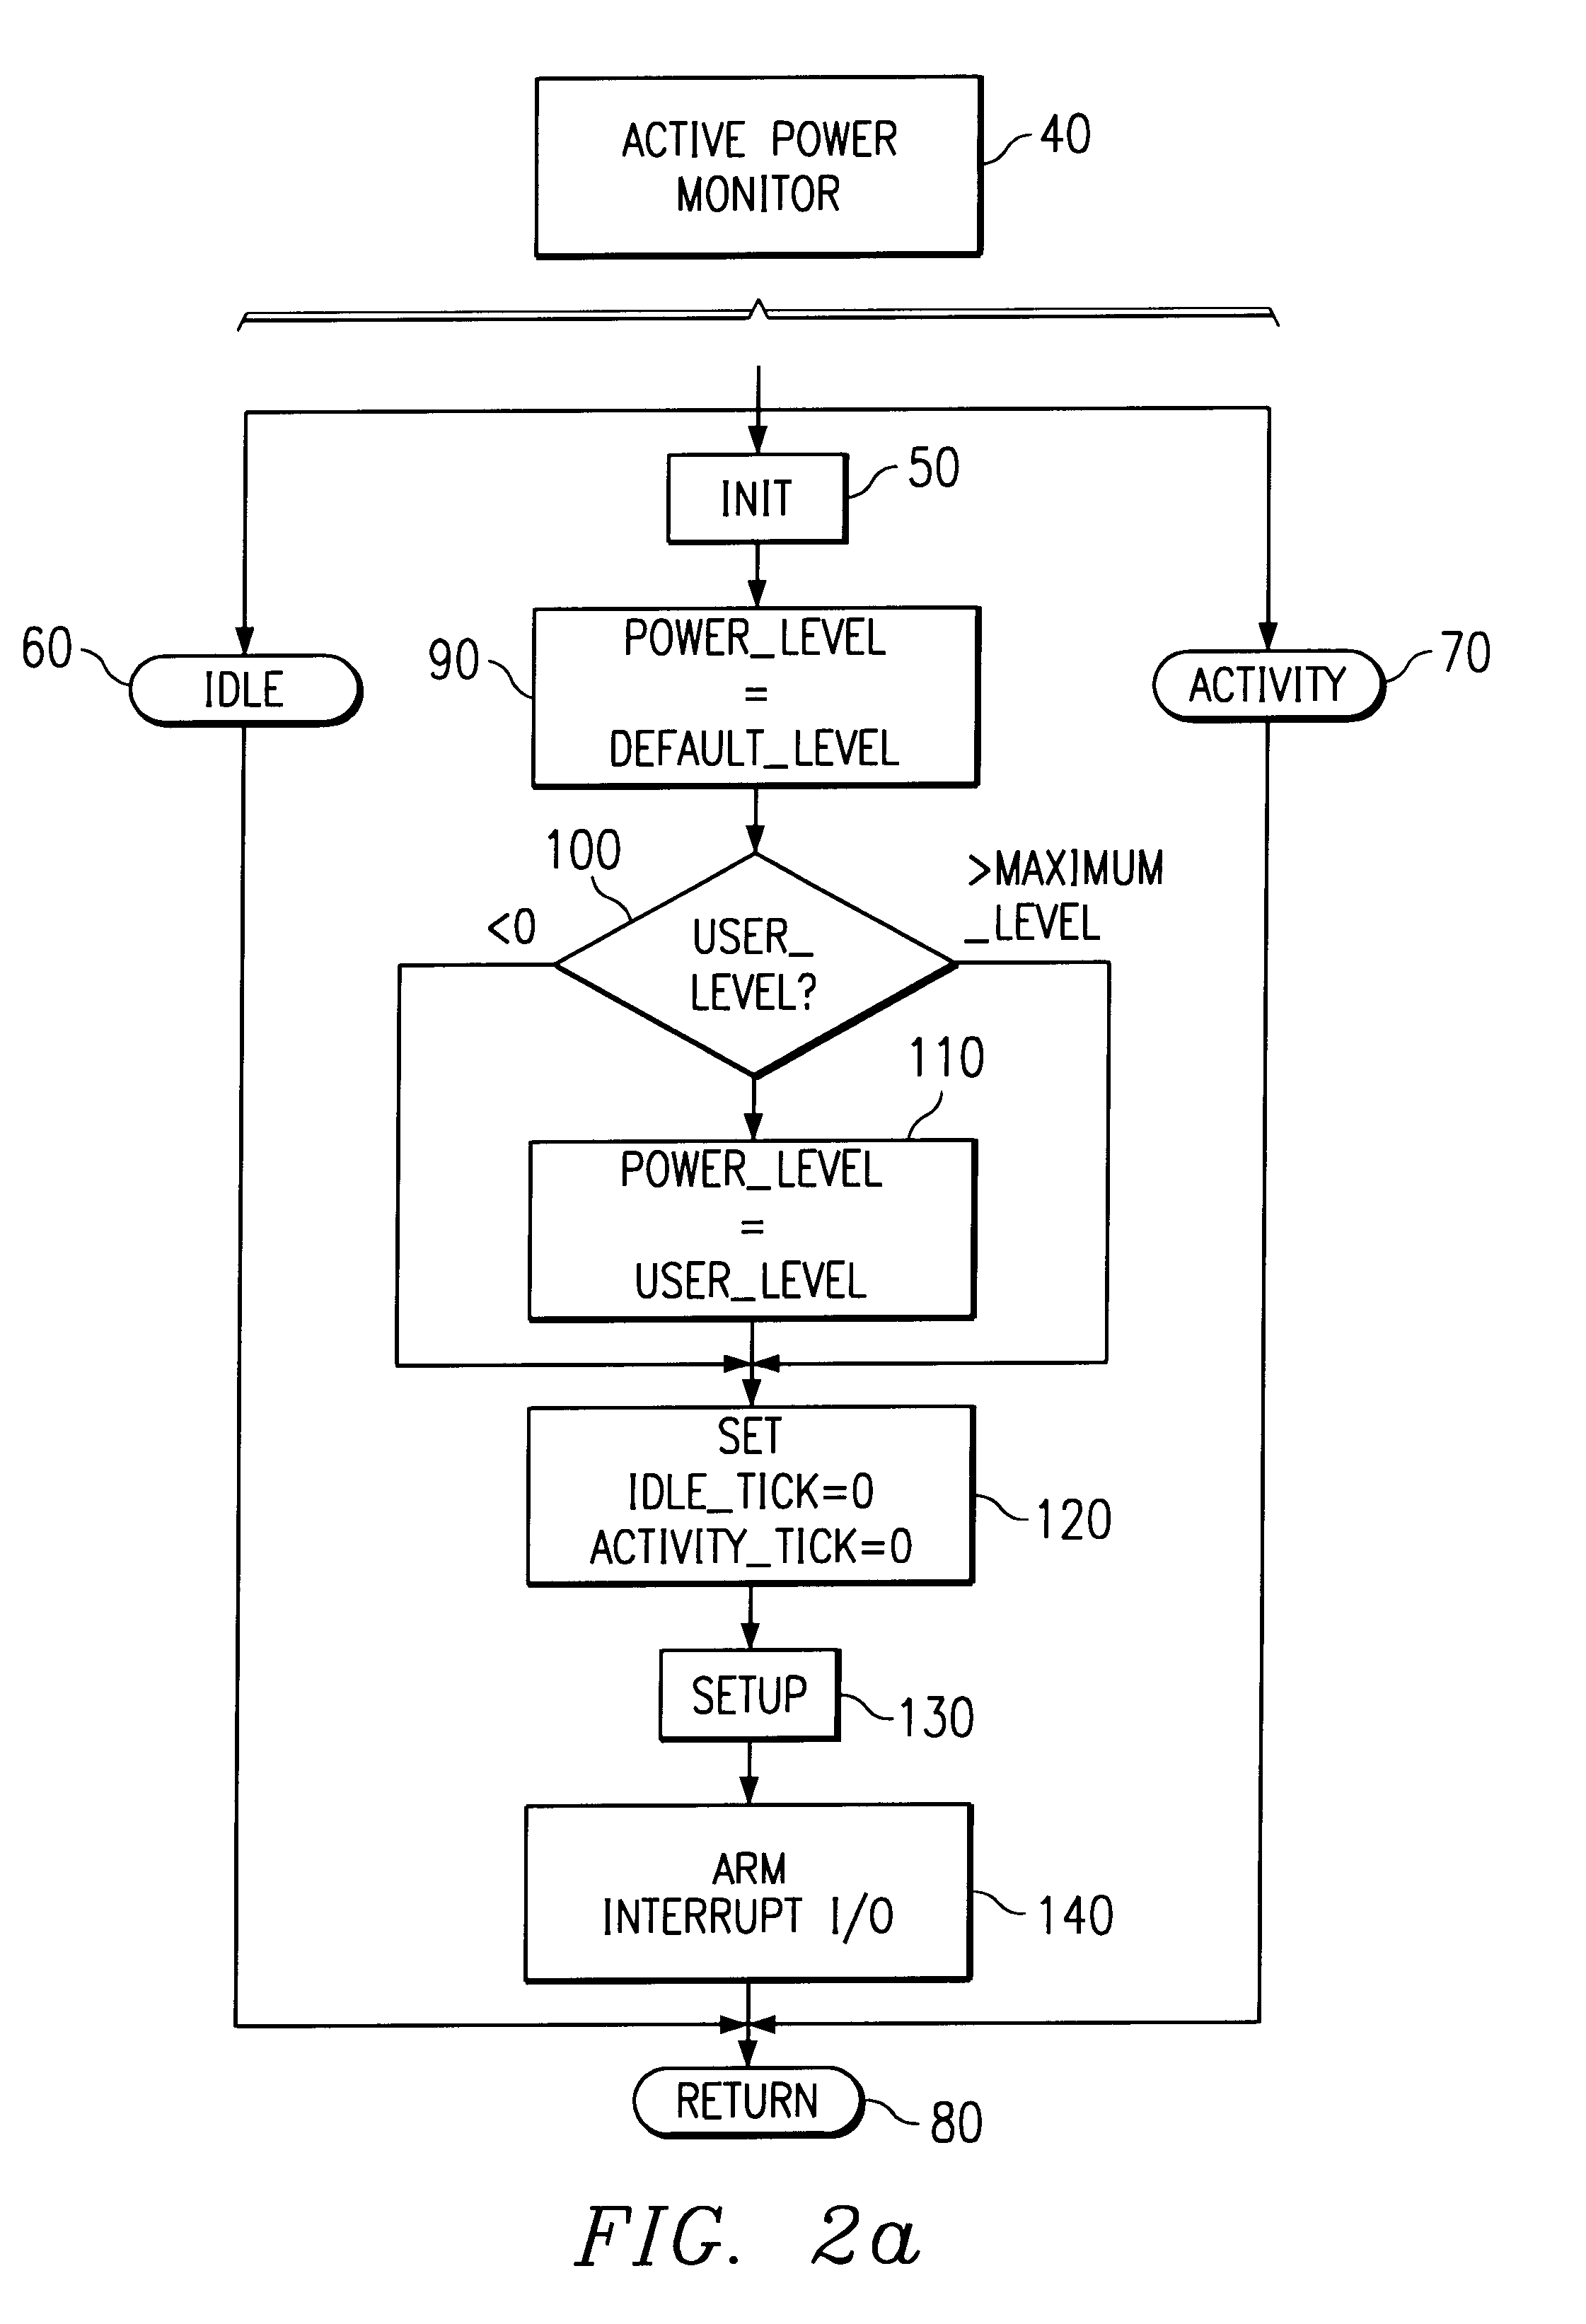 Real-time power conservation for electronic device having a processor